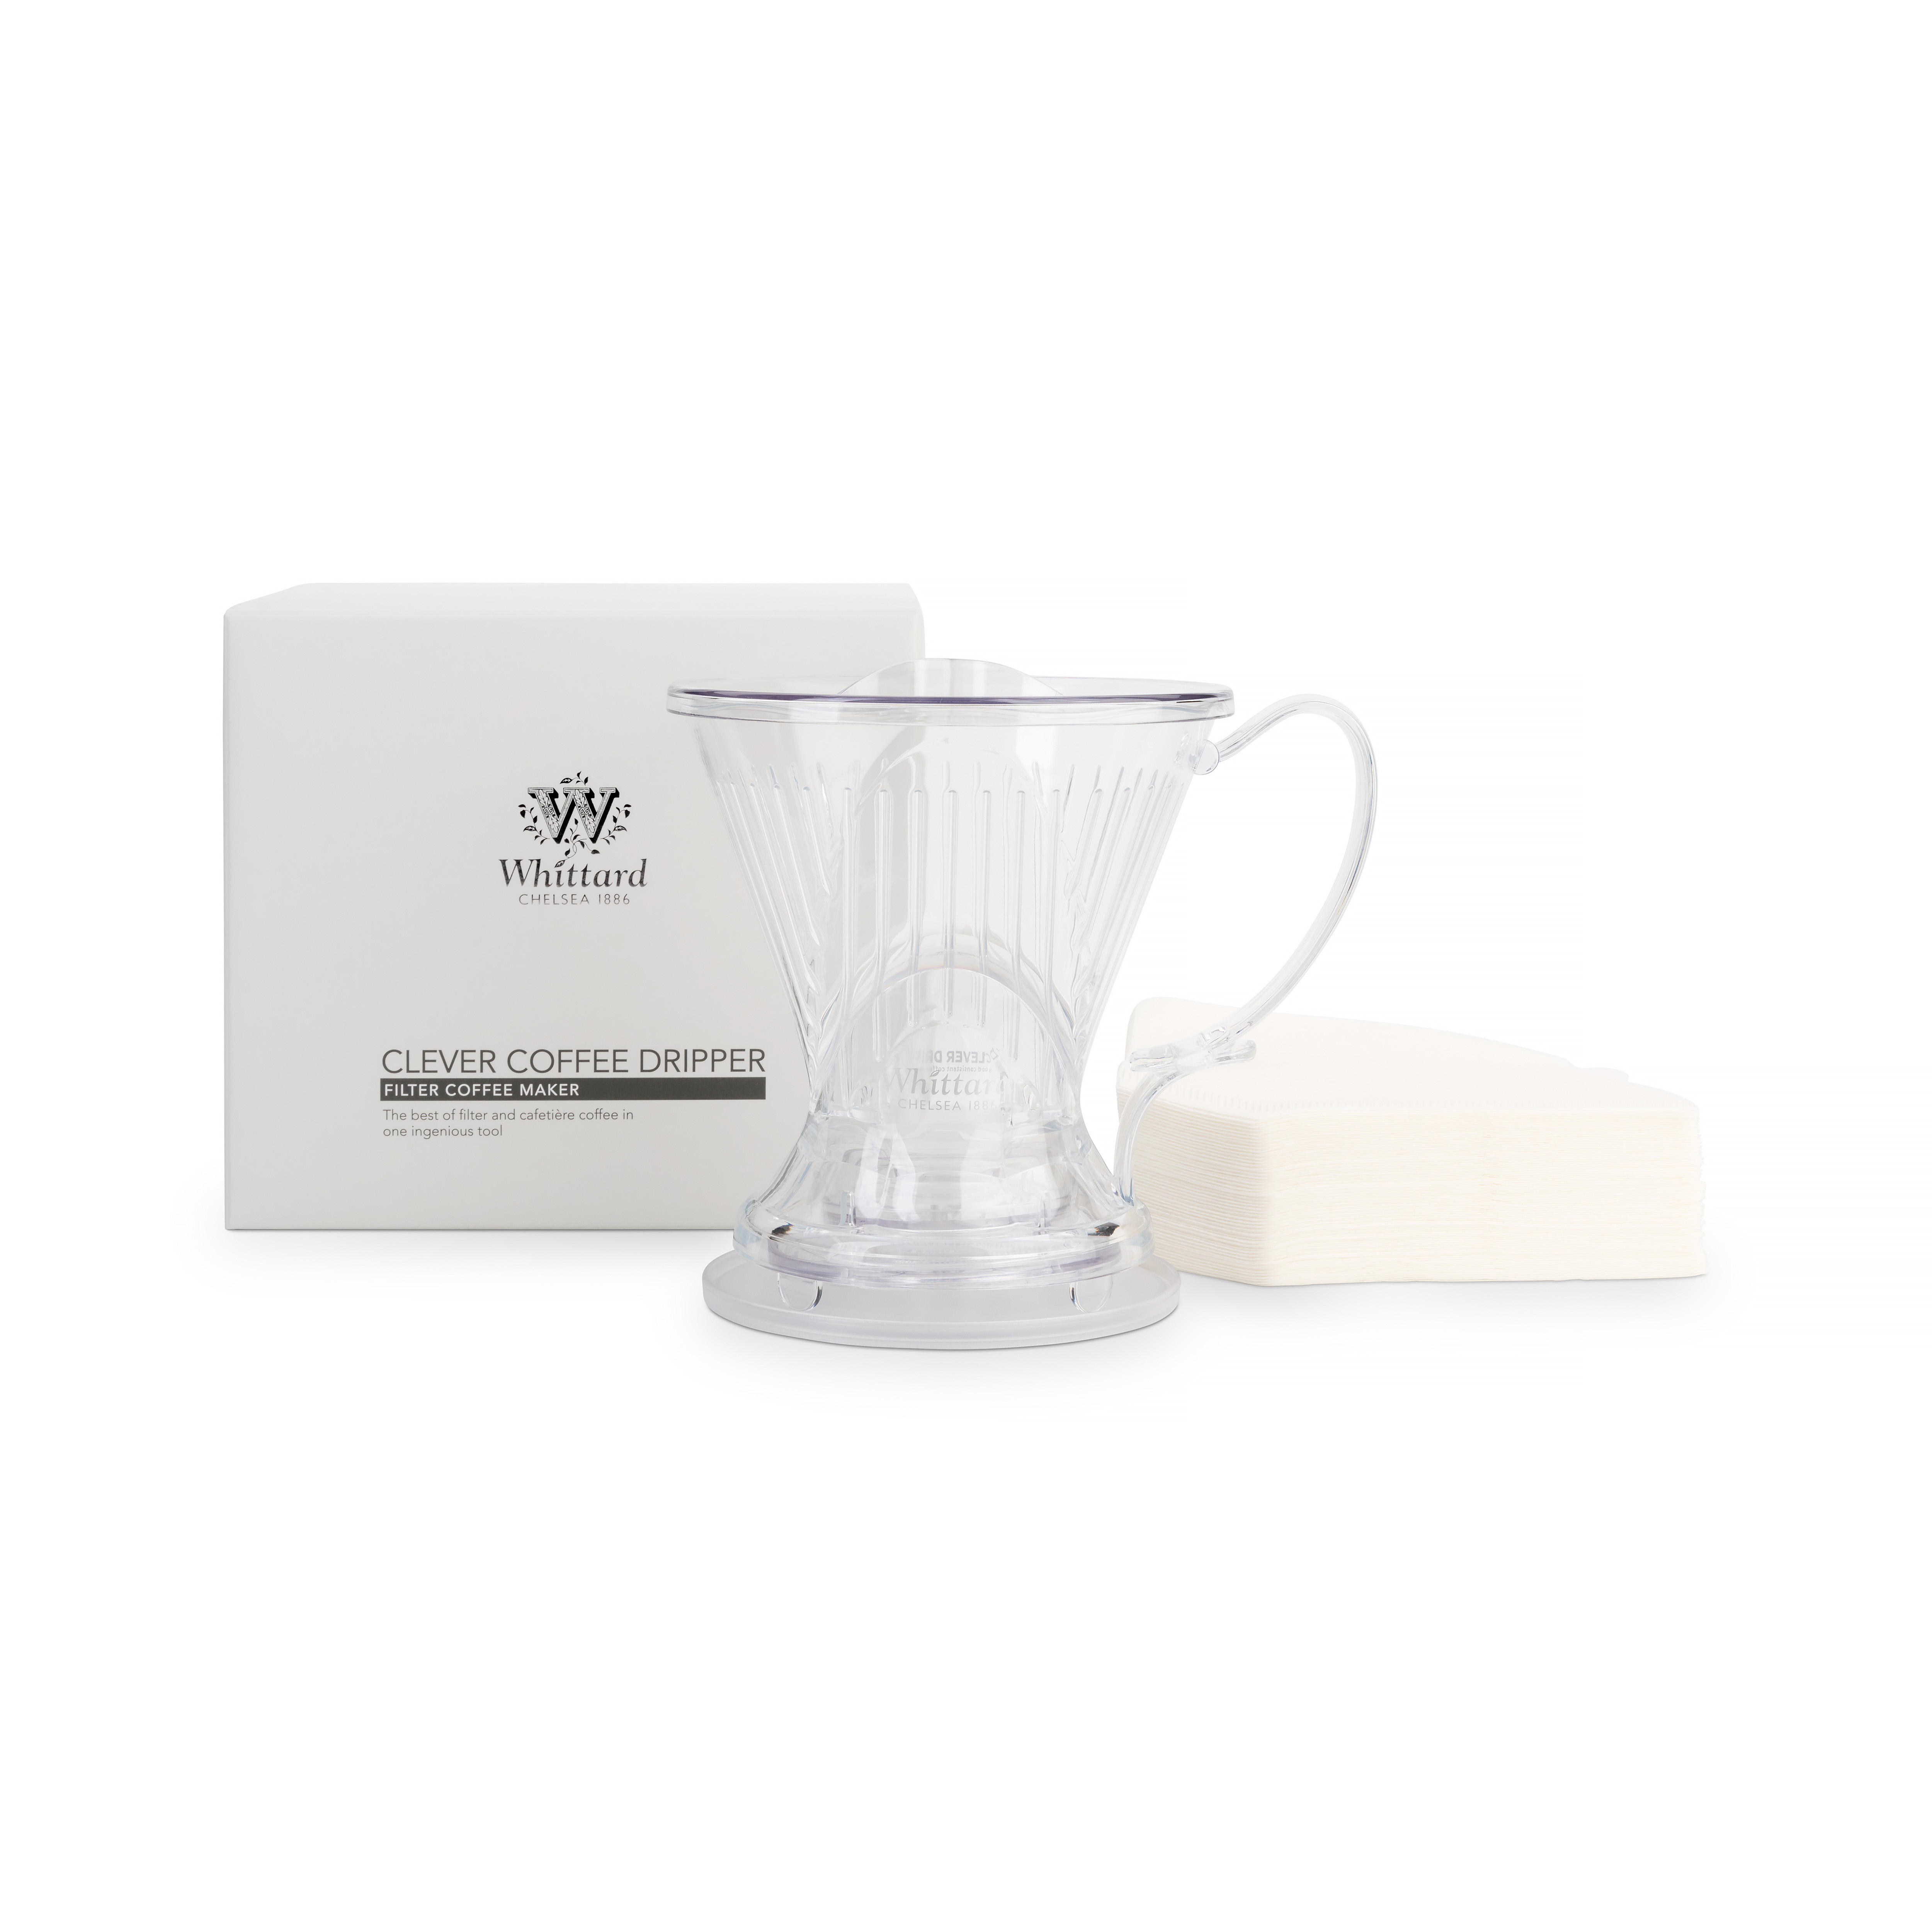 https://www.whittard.com/on/demandware.static/-/Sites-whittard-master-catalog/default/dw8c390710/images/hi-res/356576%20CLEVER%20COFFEE%20DRIPPER%20w%20product.jpeg